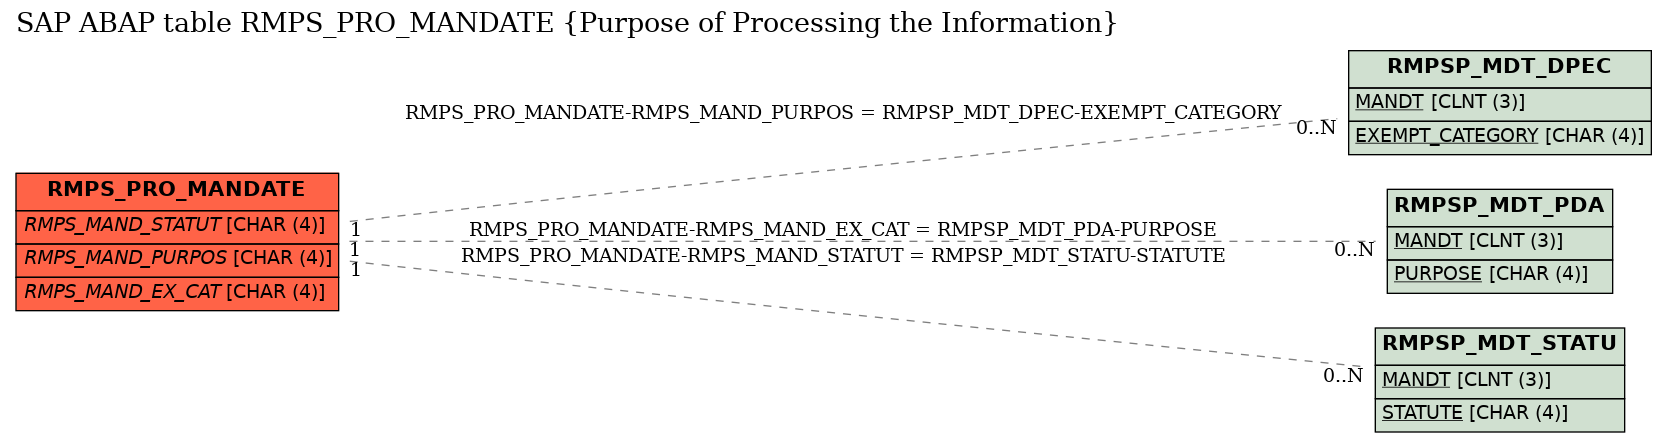 E-R Diagram for table RMPS_PRO_MANDATE (Purpose of Processing the Information)